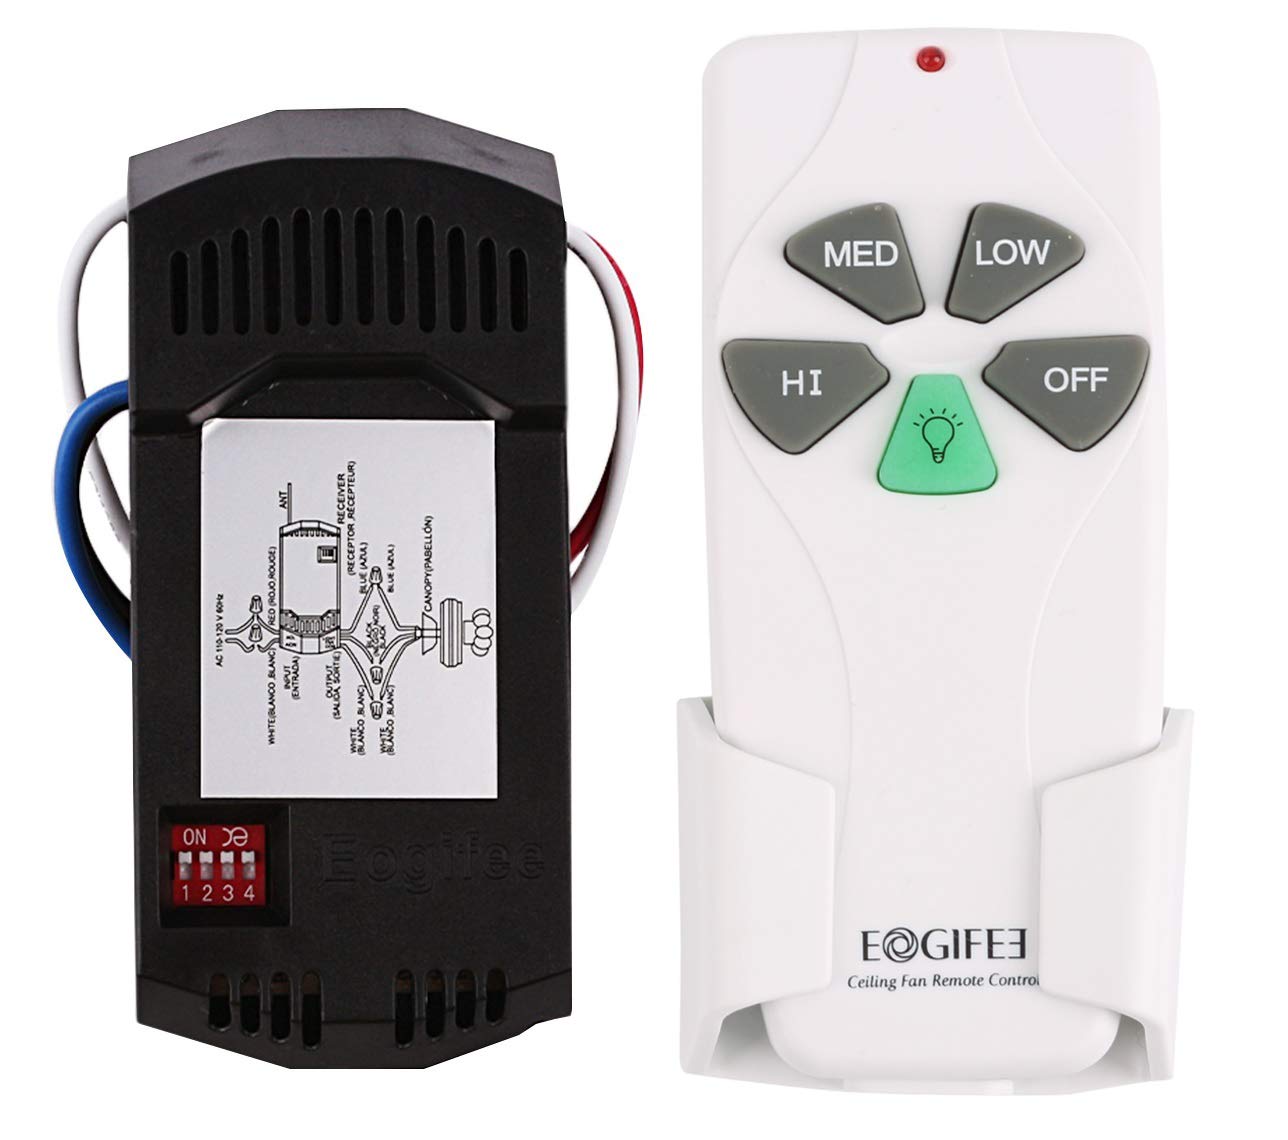 Eogifee Universal Ceiling Fan Remote Control and Receiver Kit with Timer Replacement of Hampton Bay or Harbor Breeze Kit ASIN:B072C7CTPN  UPC:729680110075